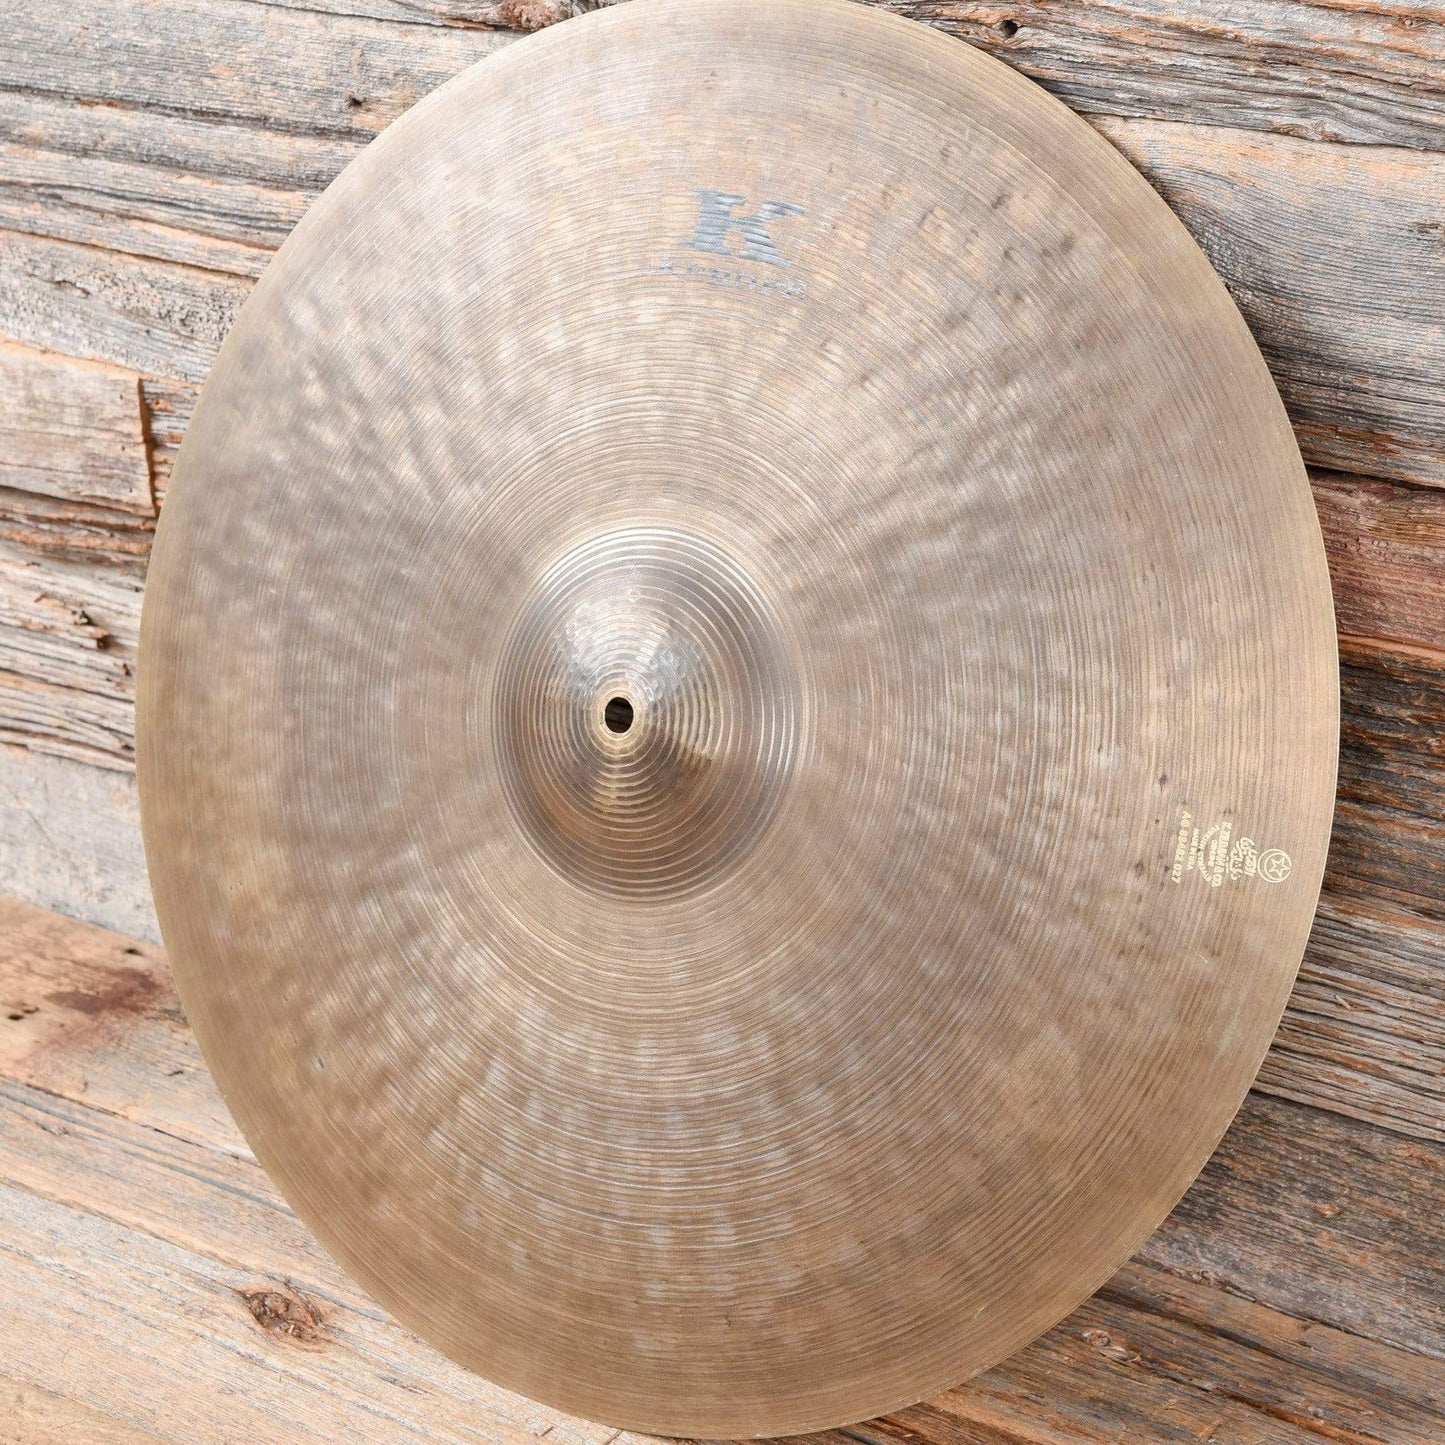 Zildjian 20" Kerope Ride Drums and Percussion / Cymbals / Ride